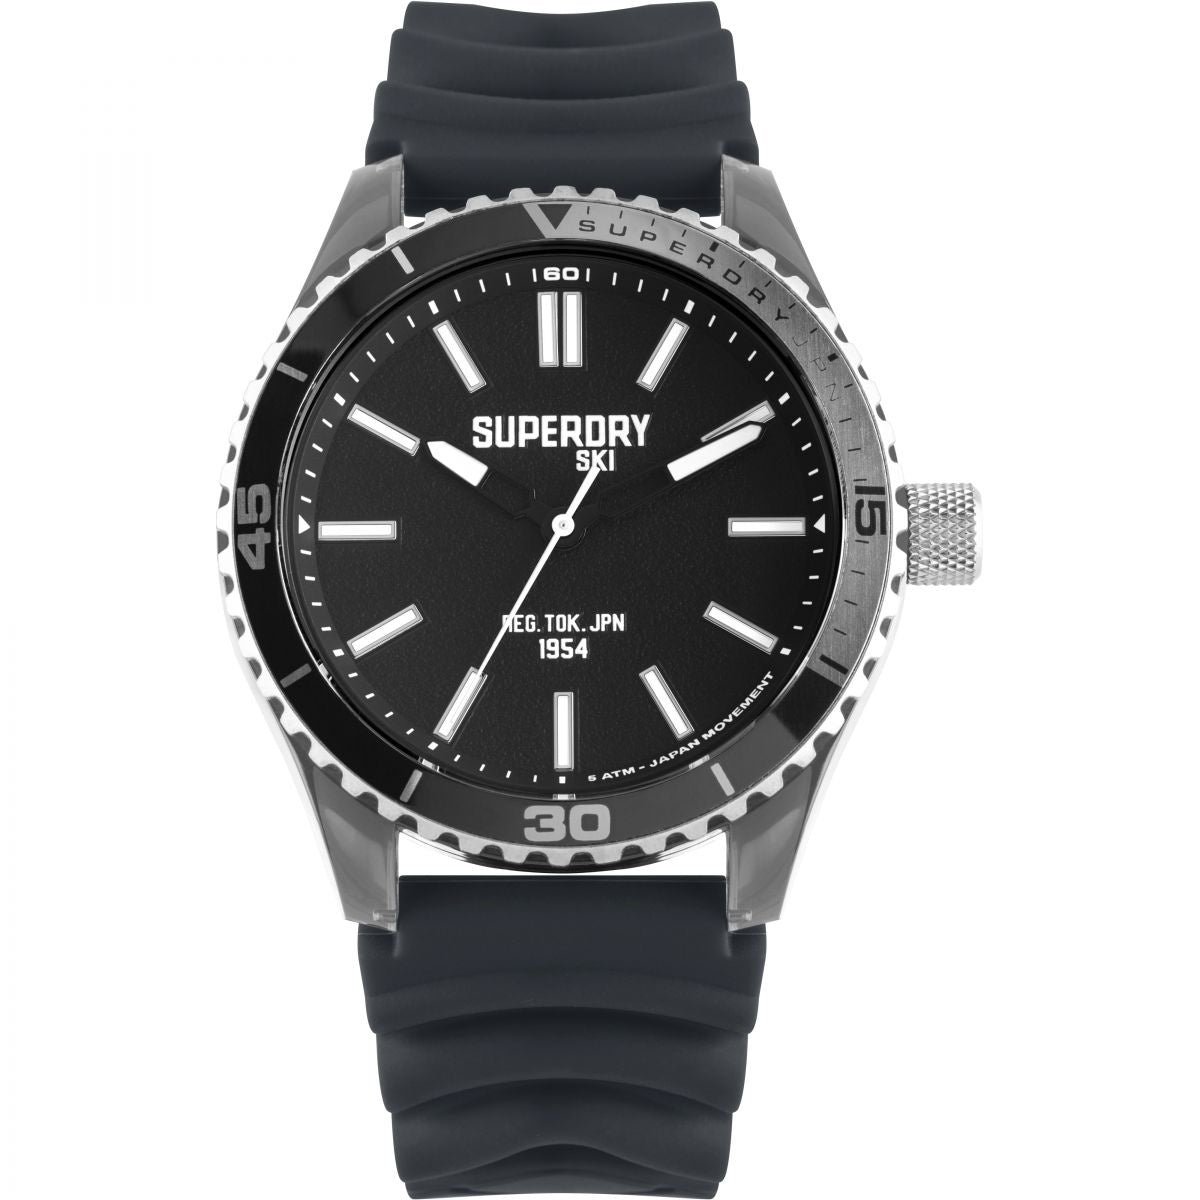 Superdry Tokyo Grey Silicone Watch SYG241E - Robert Openshaw Fine Jewellery